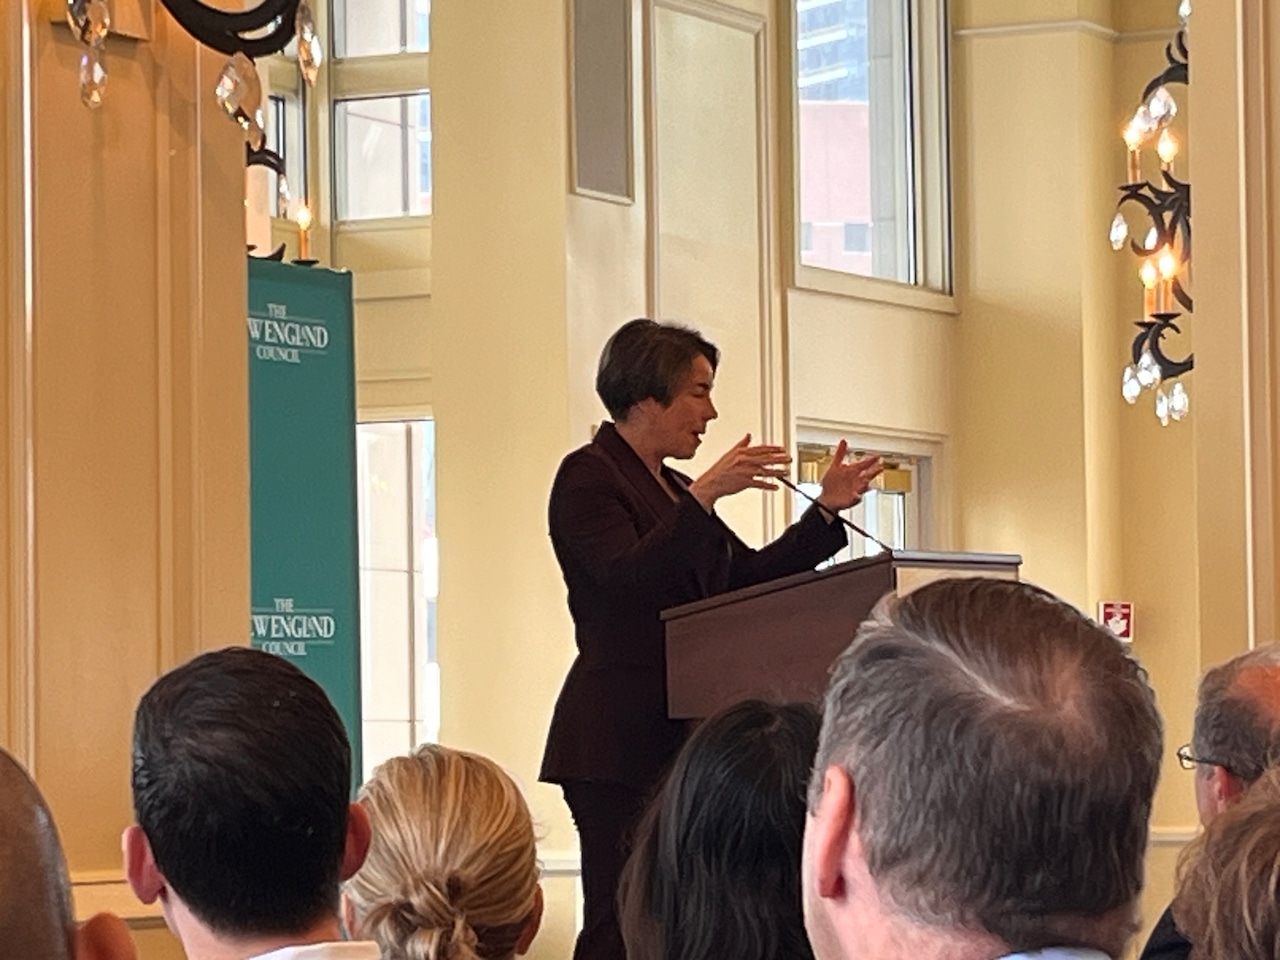 In face of challenges, Mass. has momentum, Healey tells biz leaders in Boston [Video]